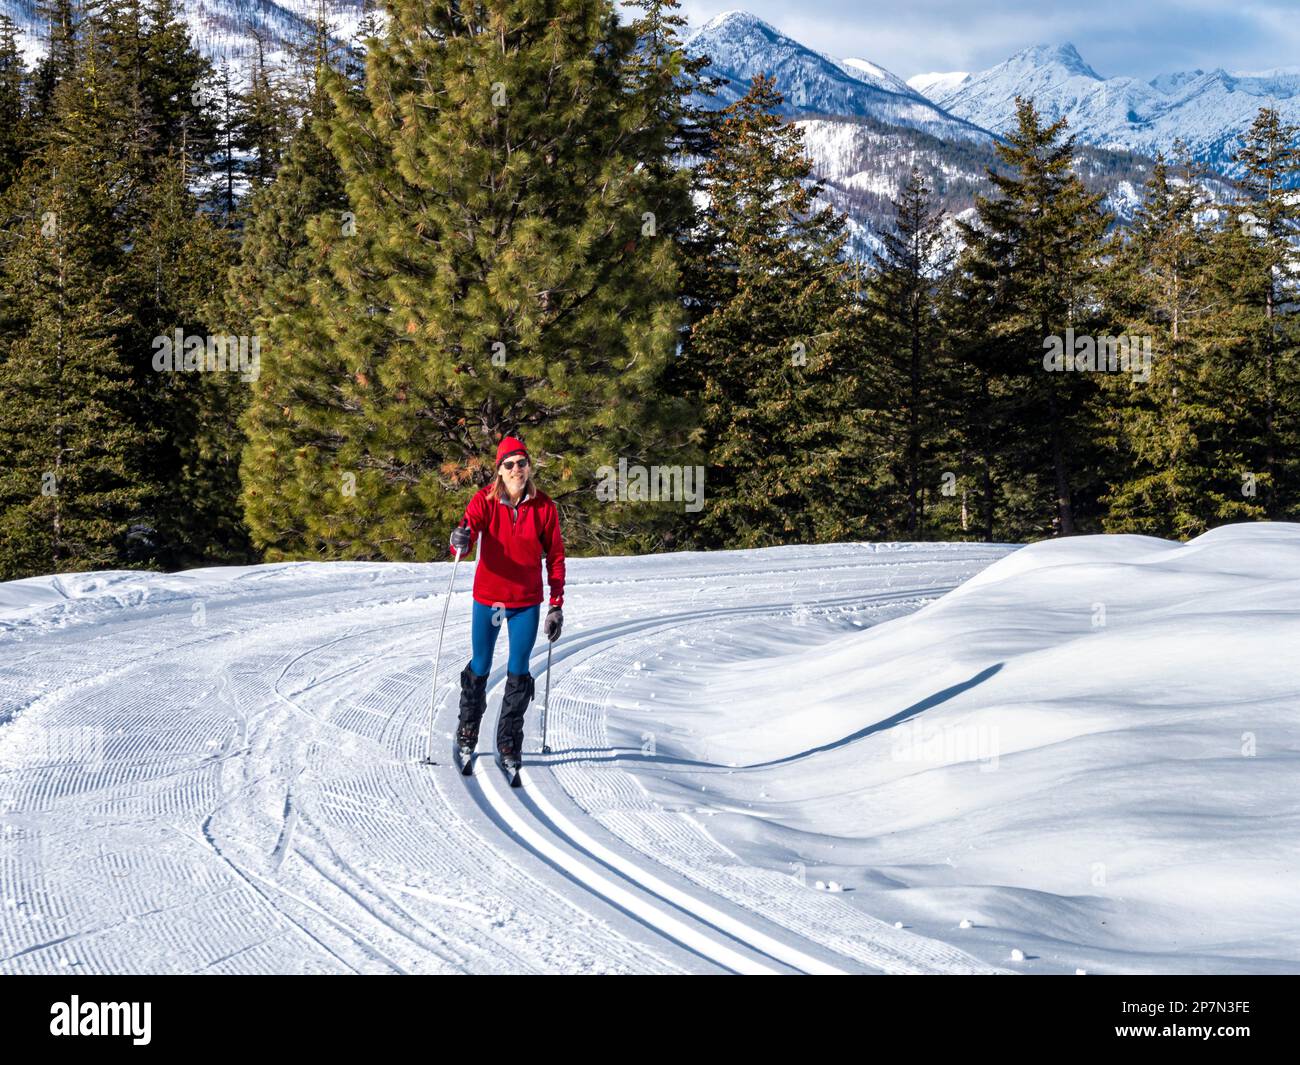 WA23232-00...WASHINGTON - Skier ascending Lower Fawn Creek cross-country ski trail in the Rendezvous Trail system of the Methow Valley. Stock Photo